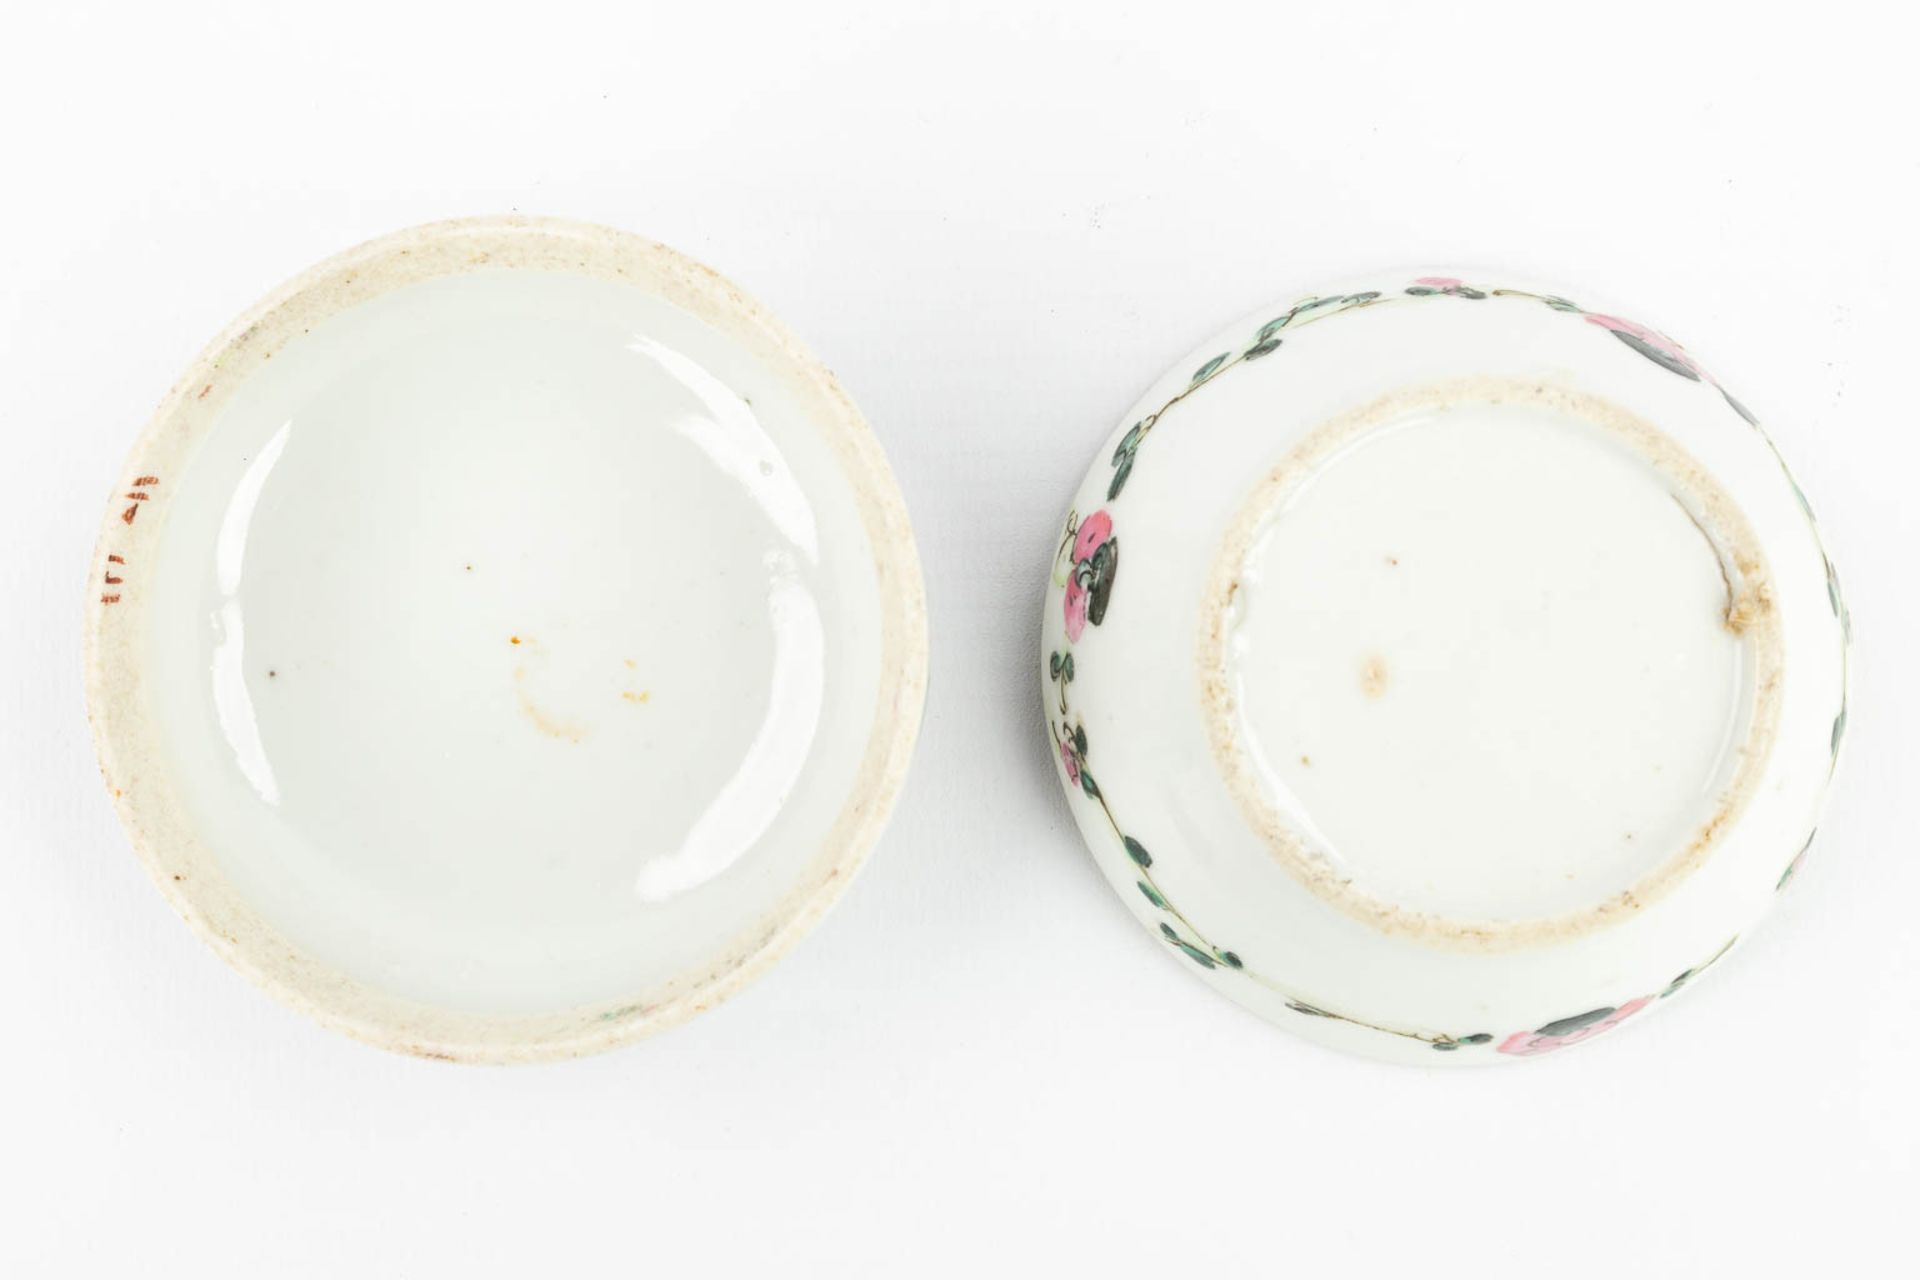 AÊset of 2 Chinese pots with lid, with hand-painted decor and made of porcelain (5 x 8,5 cm) - Image 6 of 18